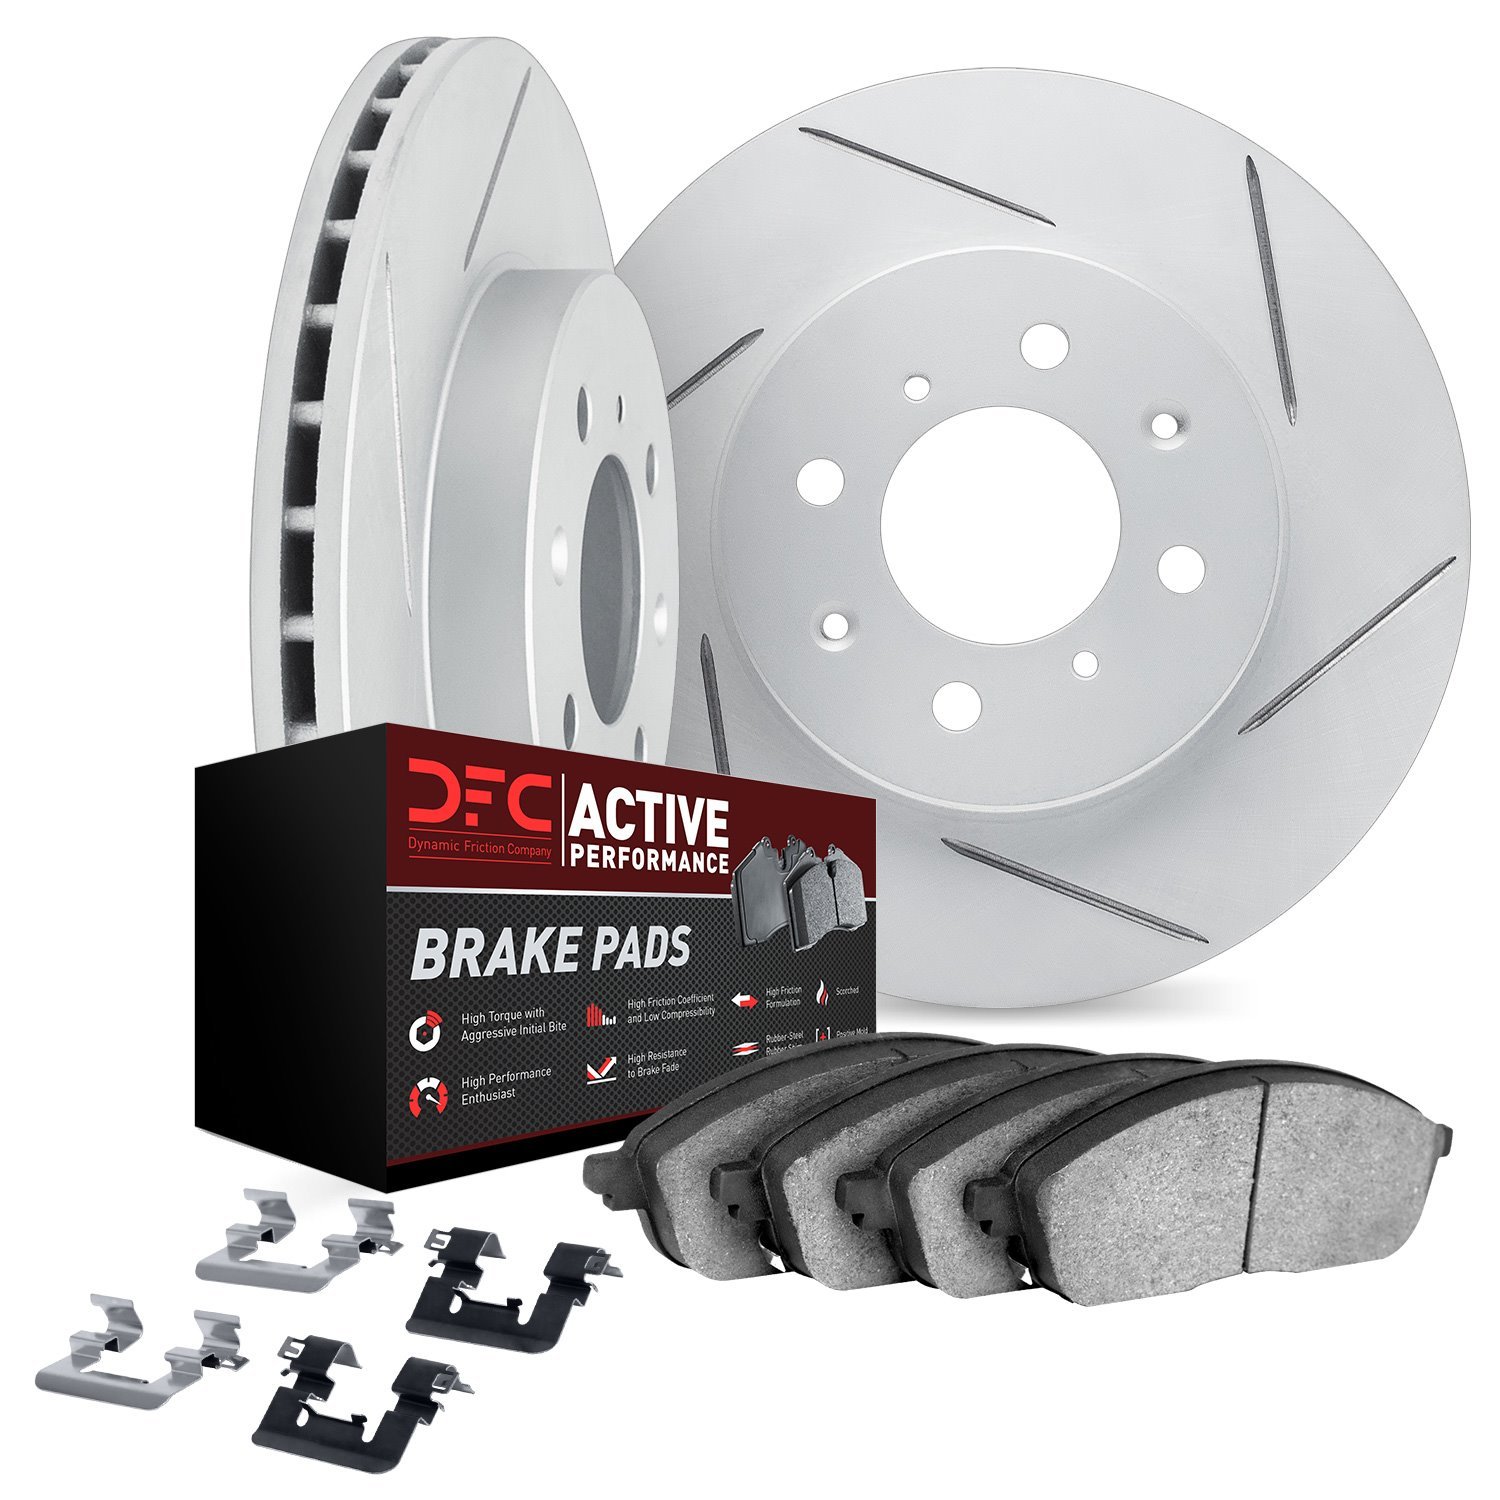 2712-80012 Geoperformance Slotted Brake Rotors with Active Performance Pads Kits & Hardware, 2001-2005 Ford/Lincoln/Mercury/Mazd